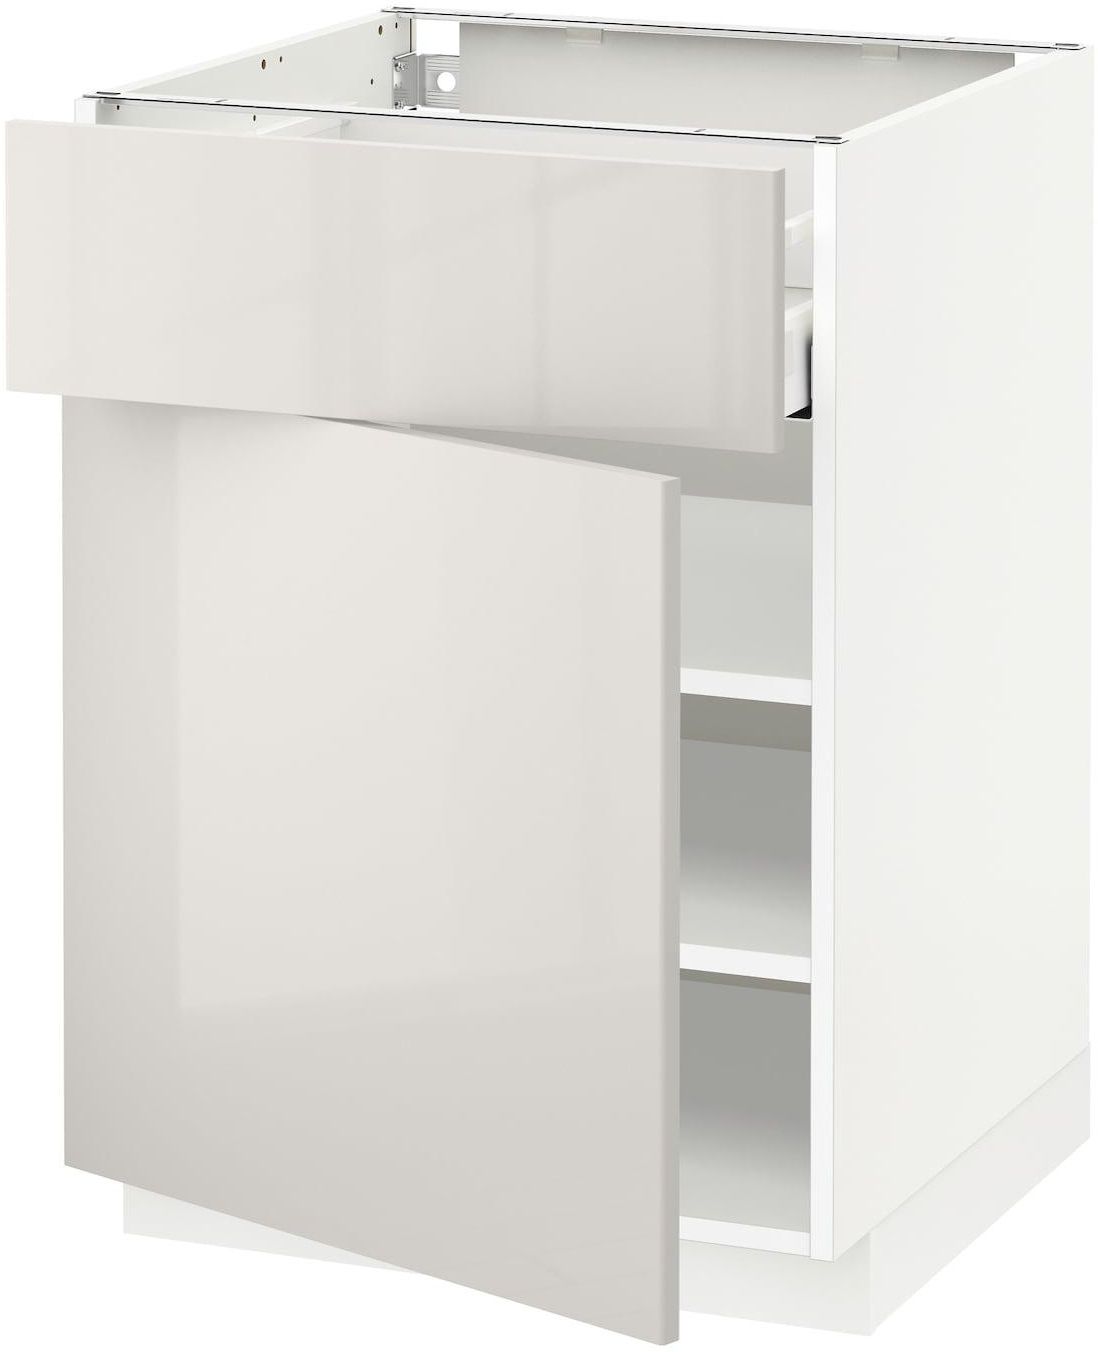 METOD / MAXIMERA Base cabinet with drawer/door - white/Ringhult light grey 60x60 cm